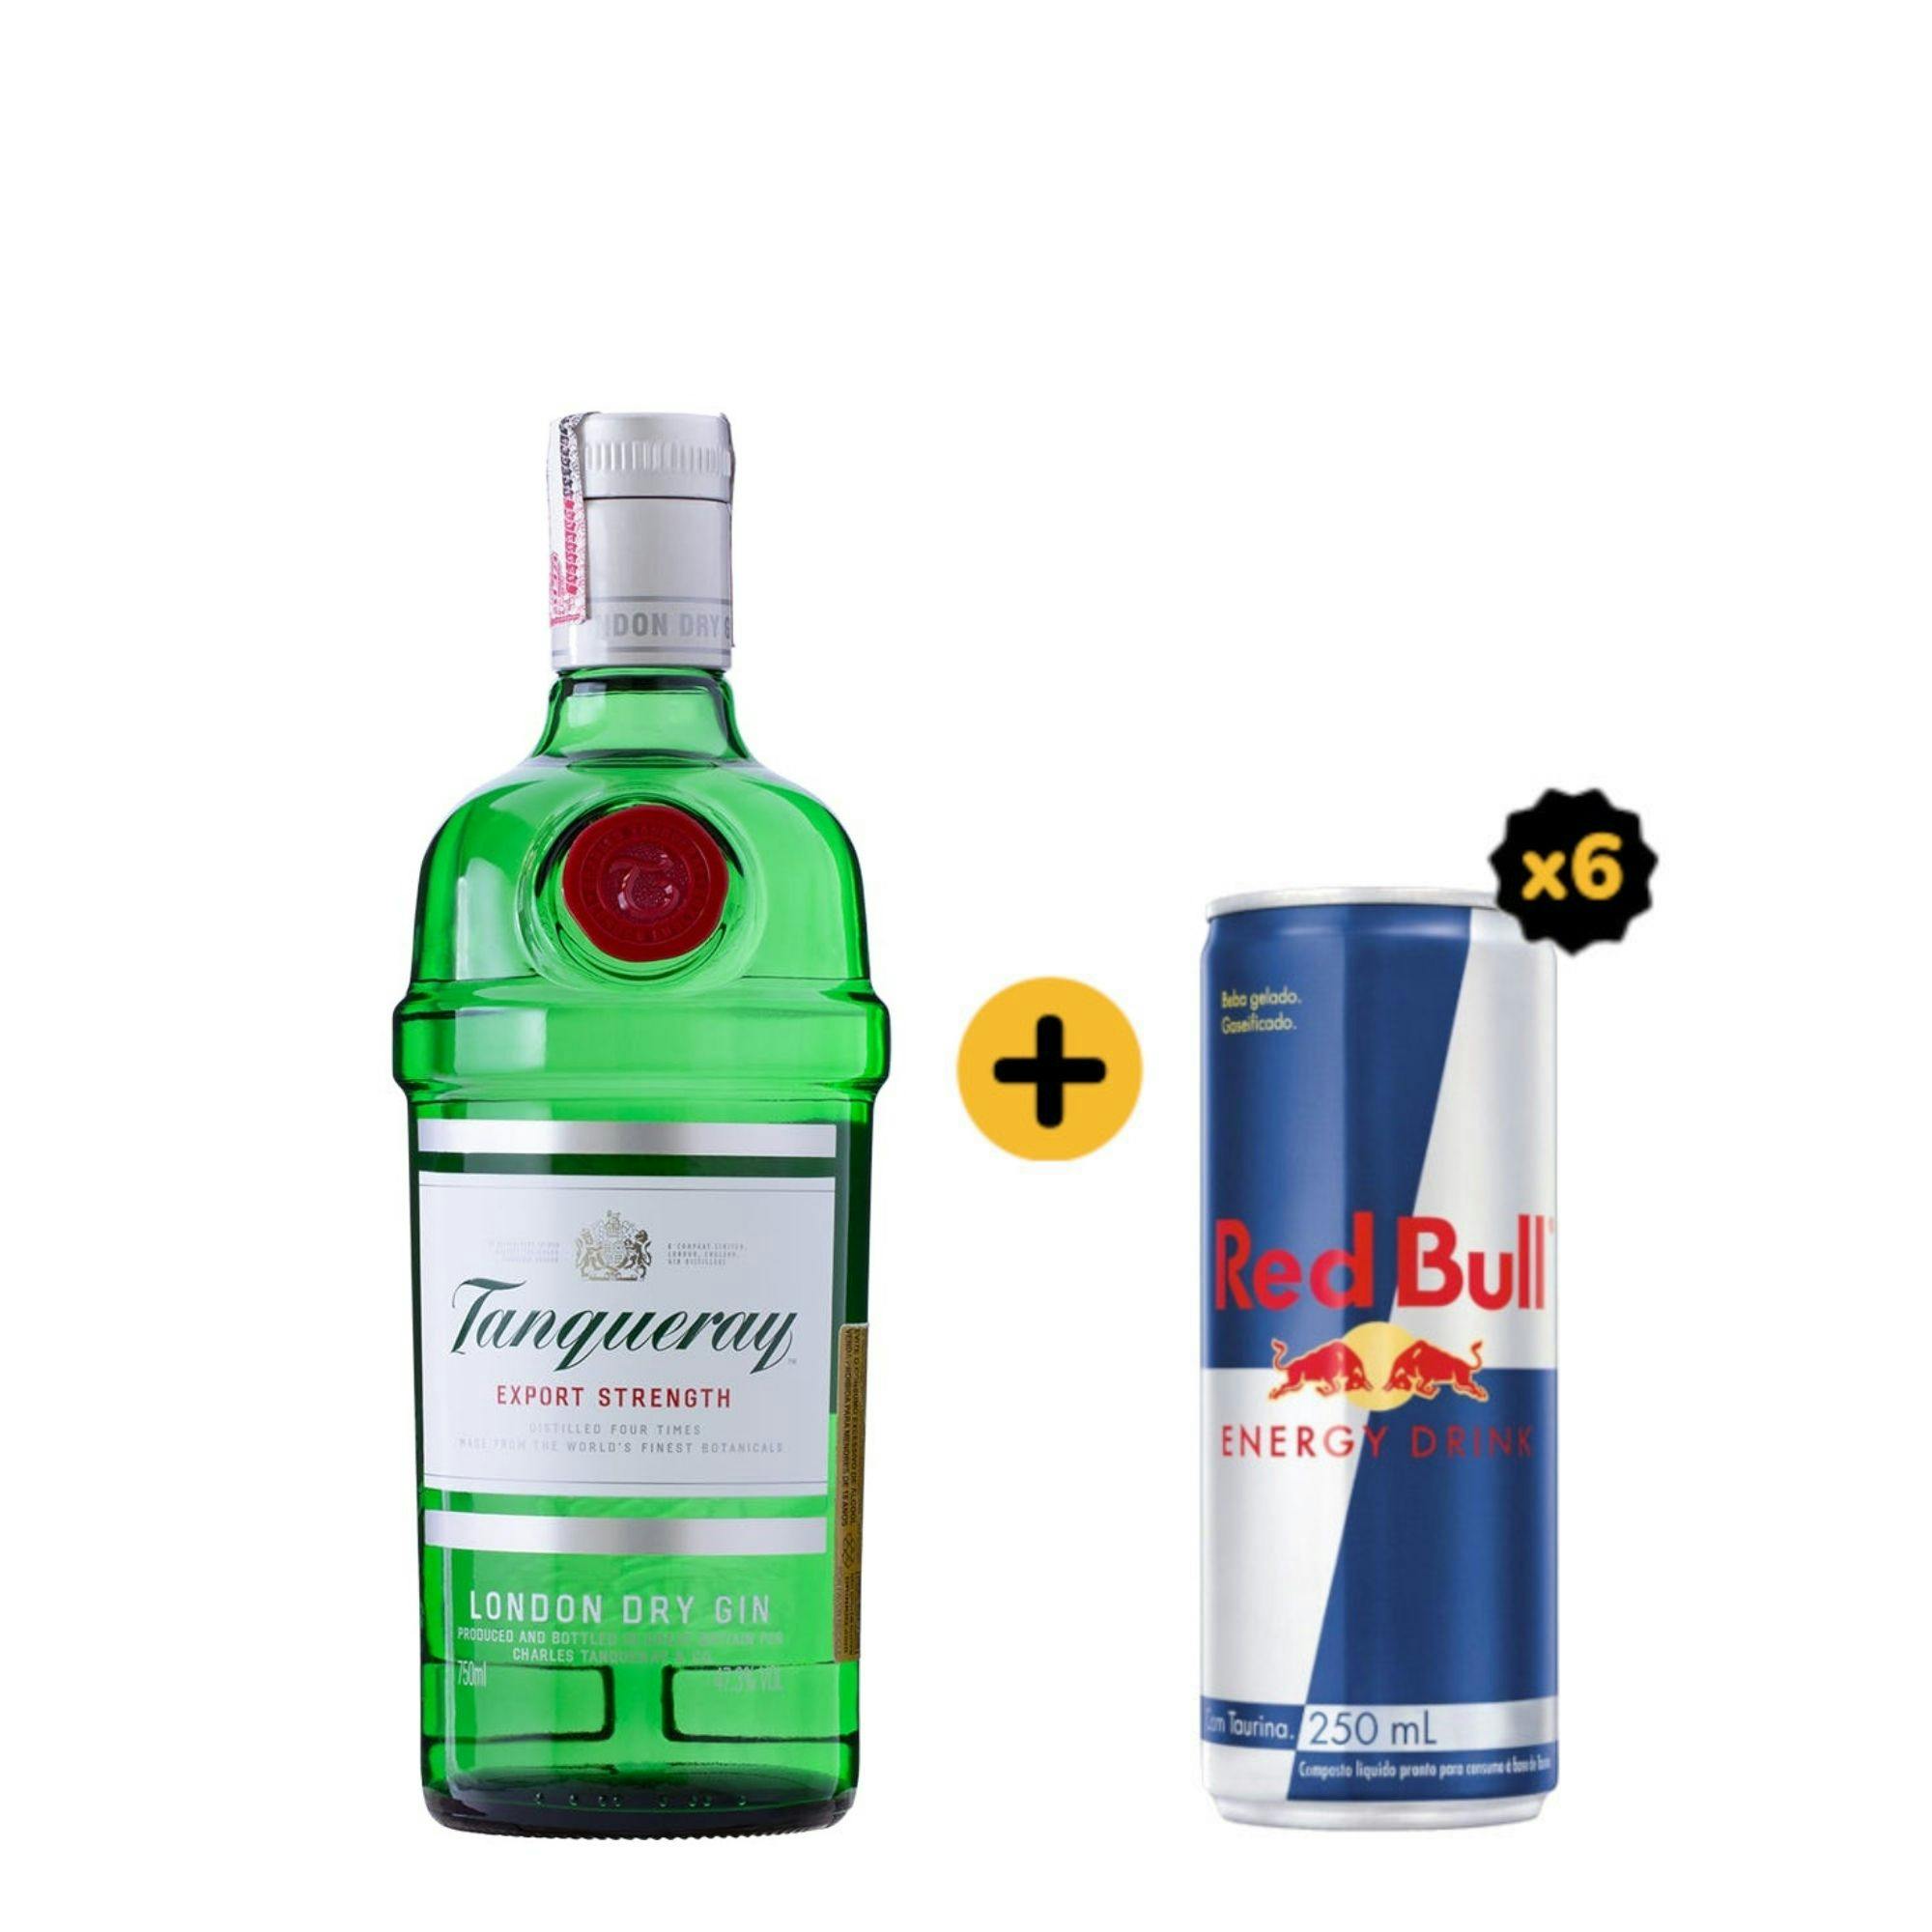 Combo Tanqueray + Red Bull (1 Gin Tanqueray 750ml + 6 Red Bull Energy Drink 250ml)